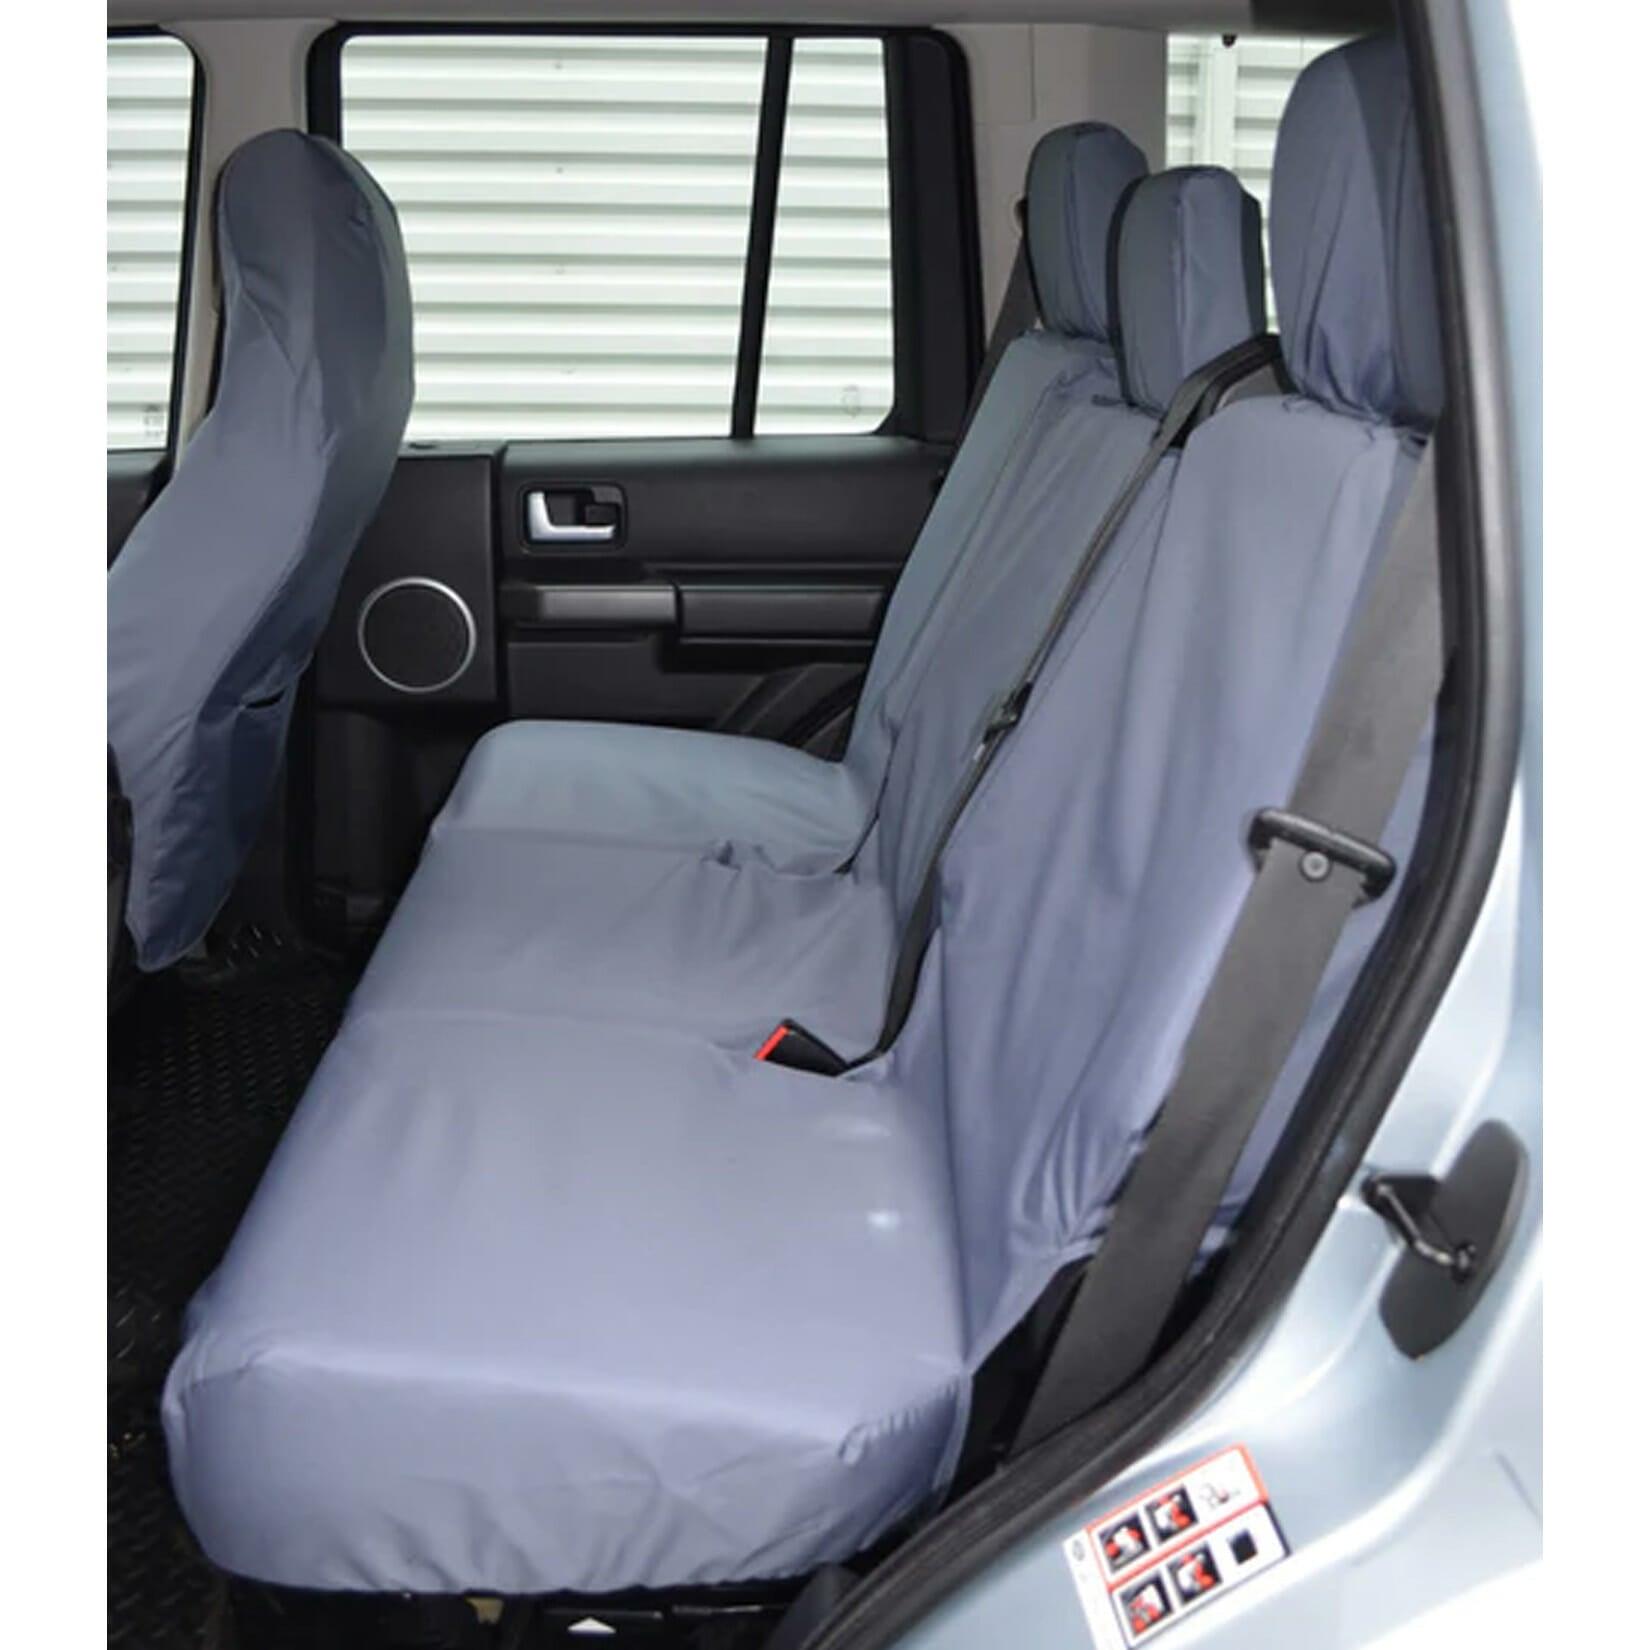 LAND ROVER DISCOVERY 3 4 REAR SEAT COVERS - GREY - Storm Xccessories2